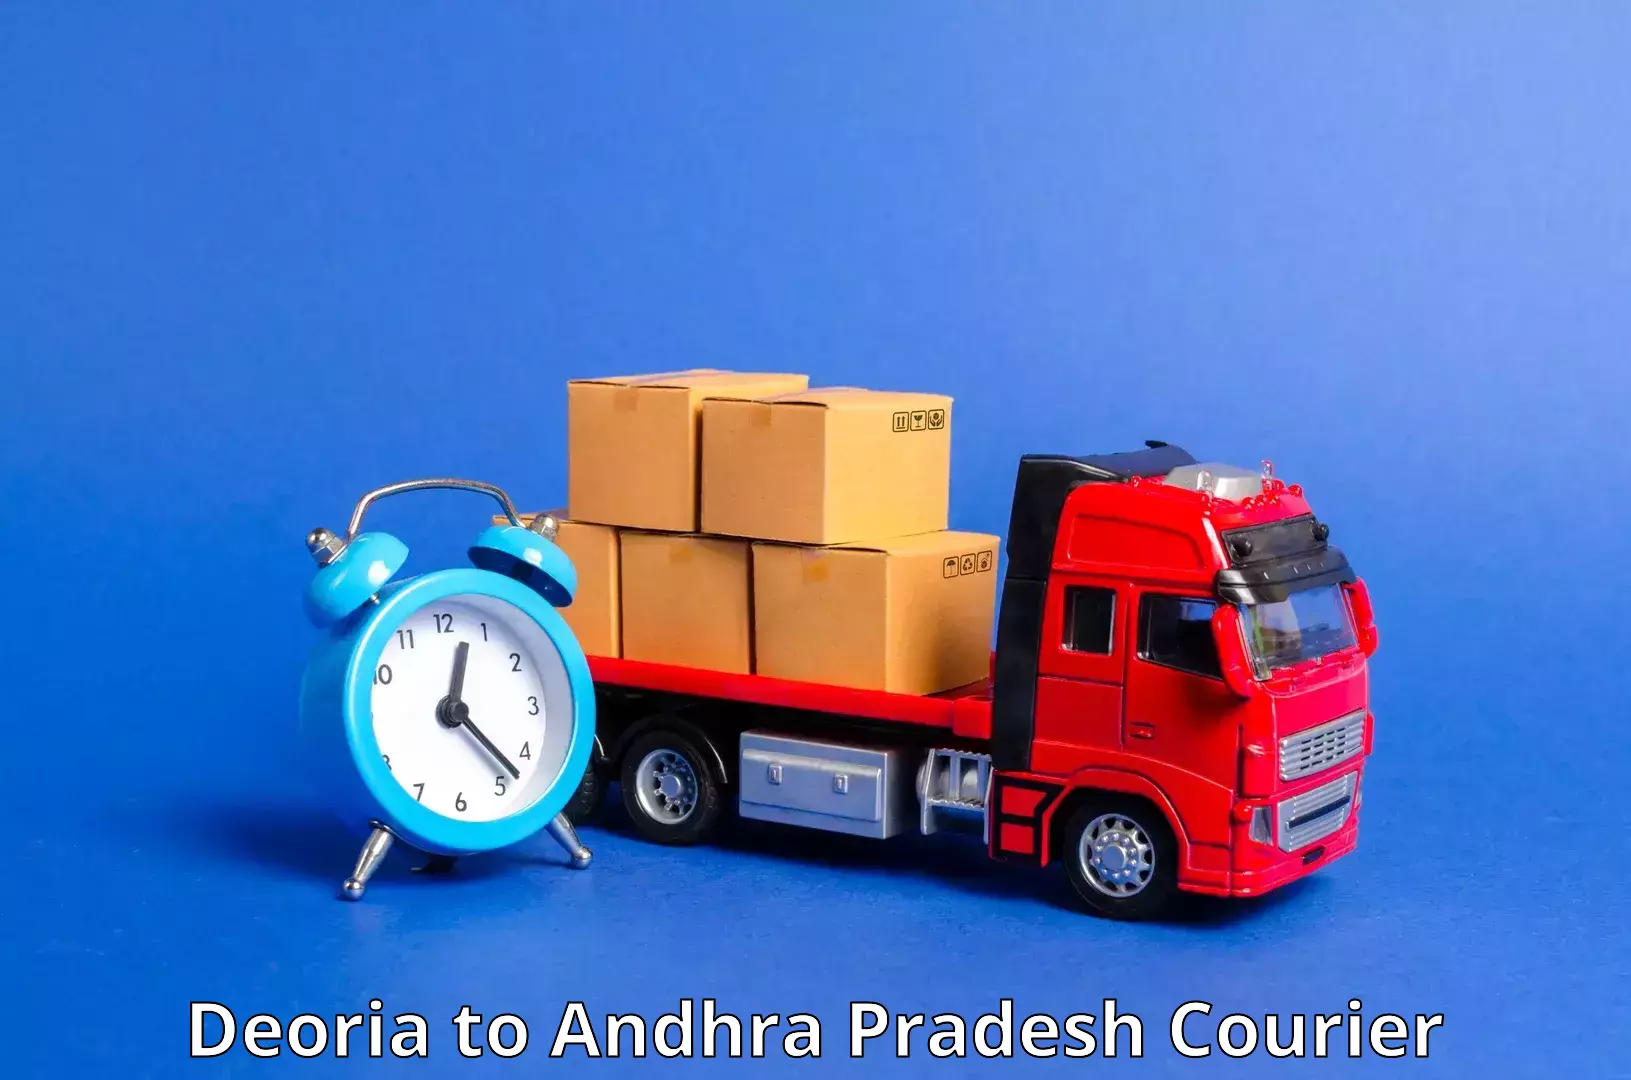 On-call courier service Deoria to Vempalli